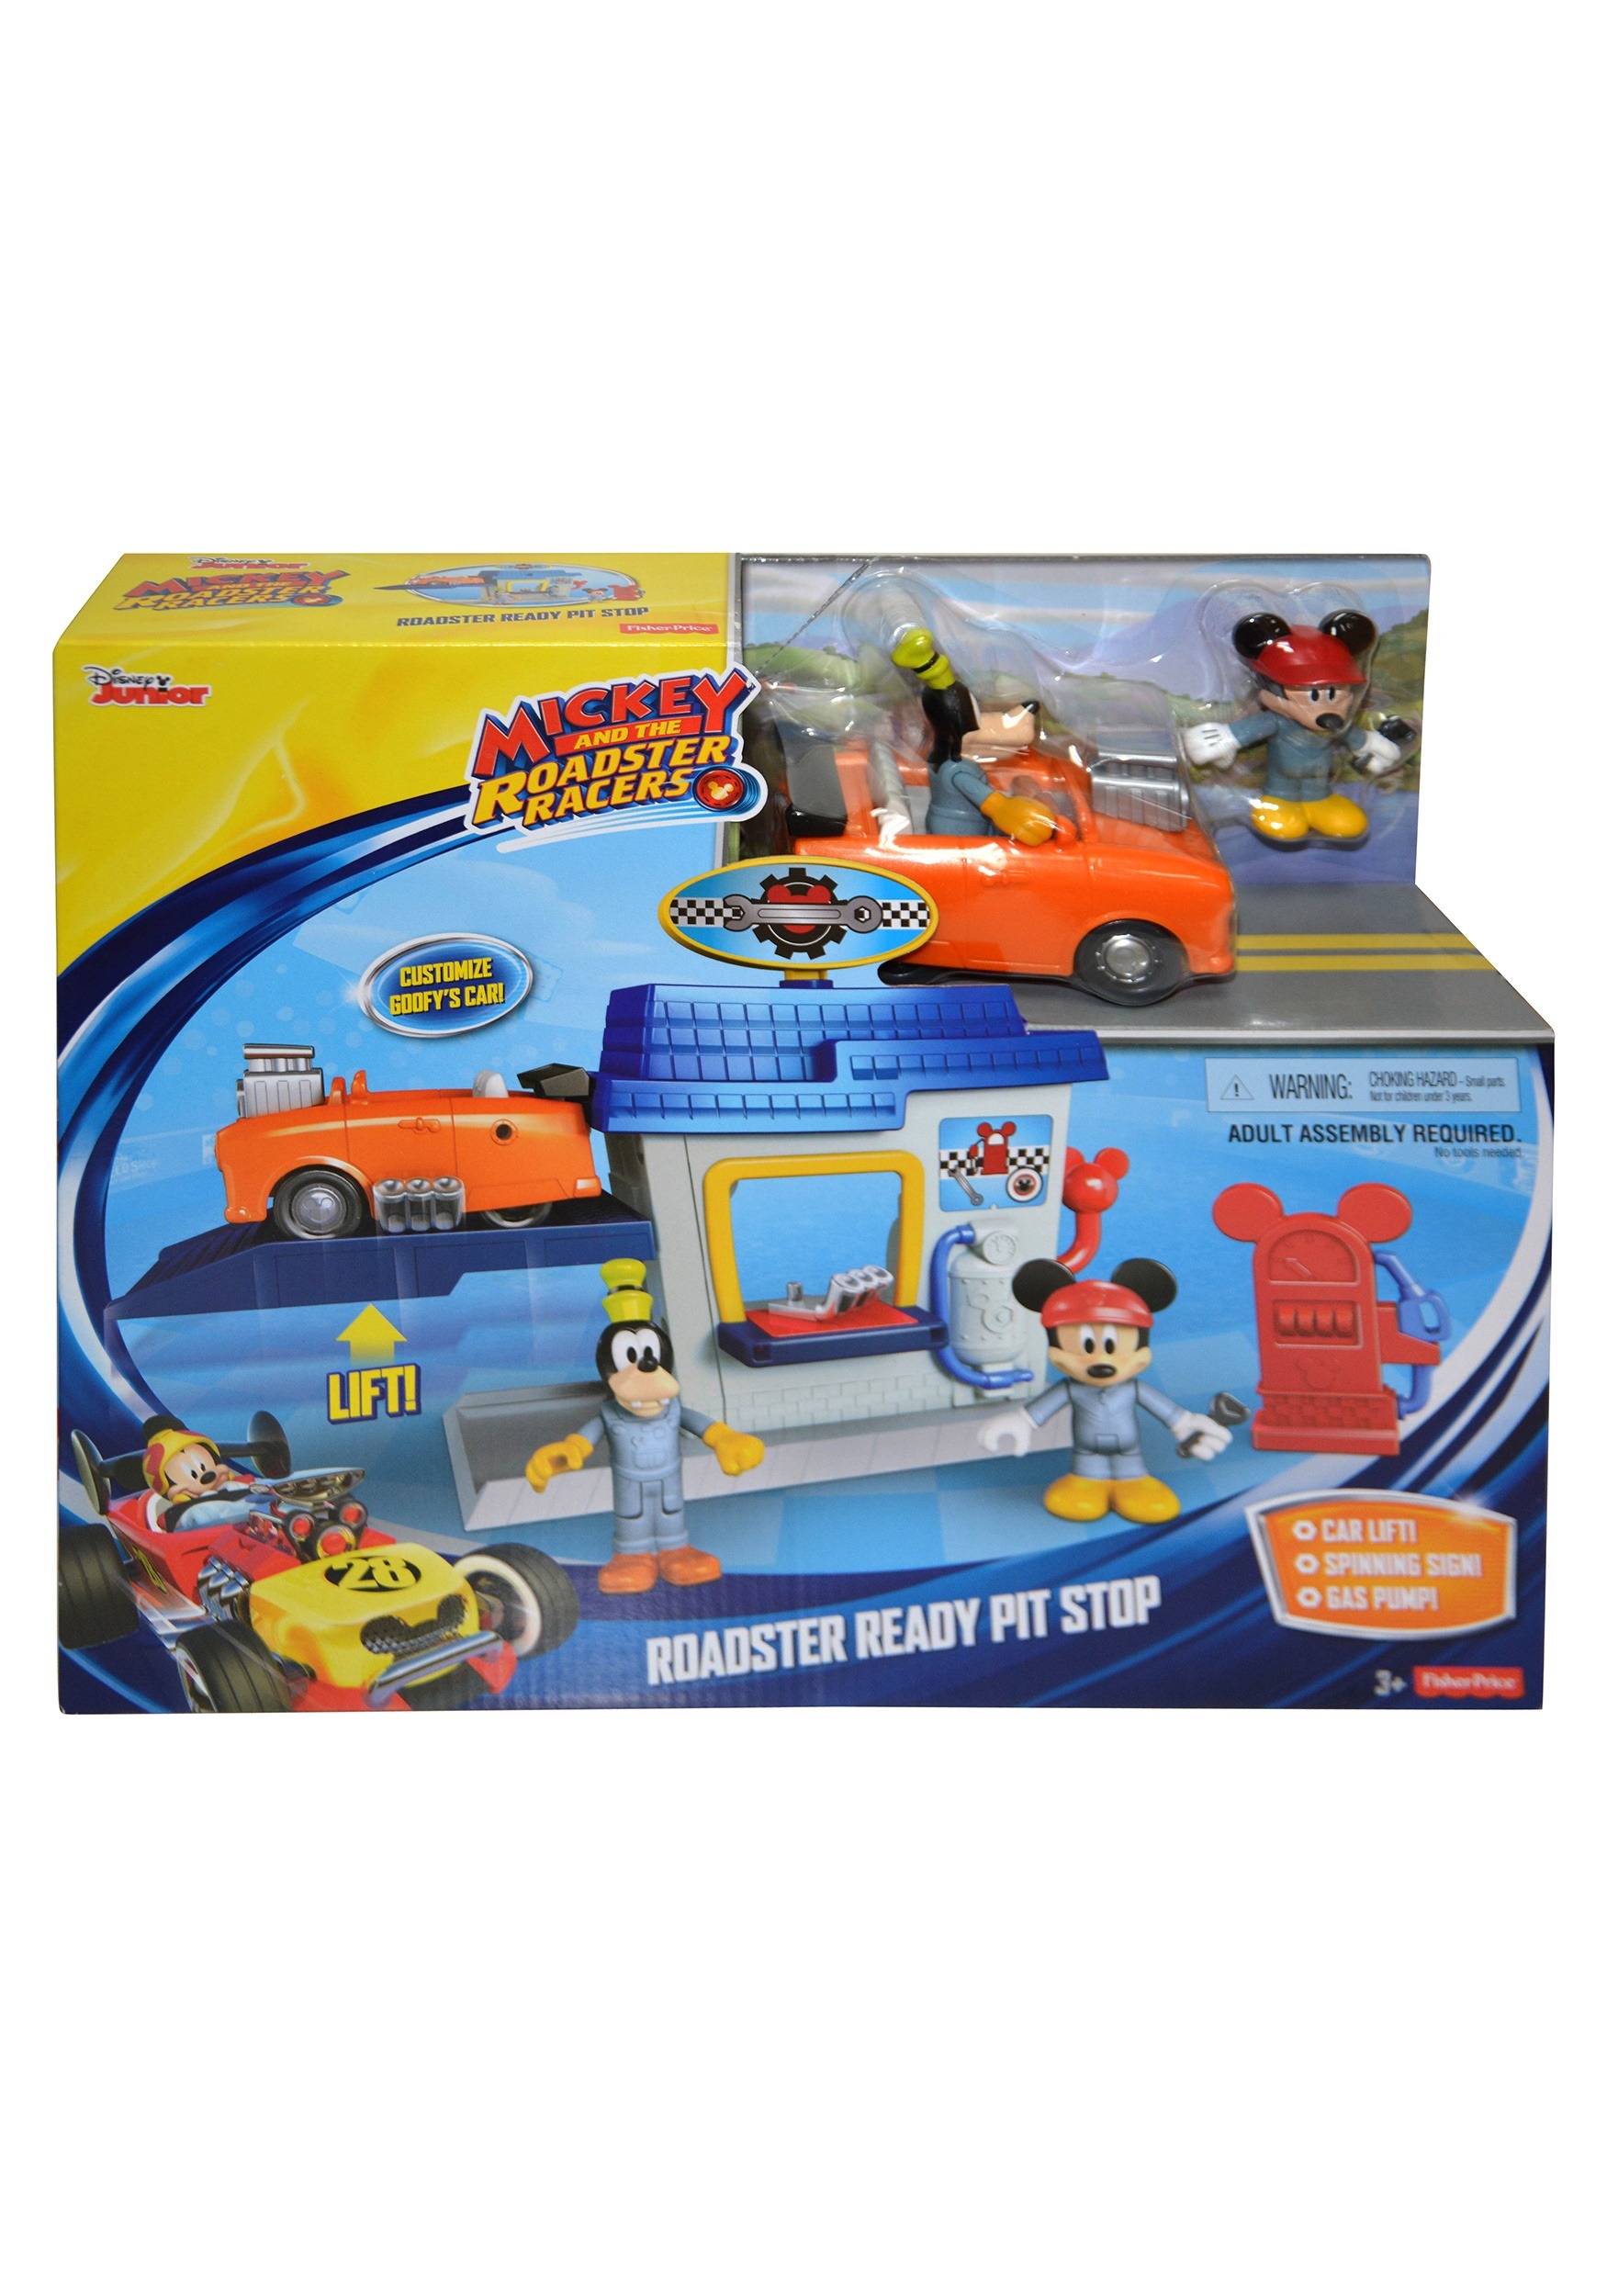 fisher price mickey and the roadster racers